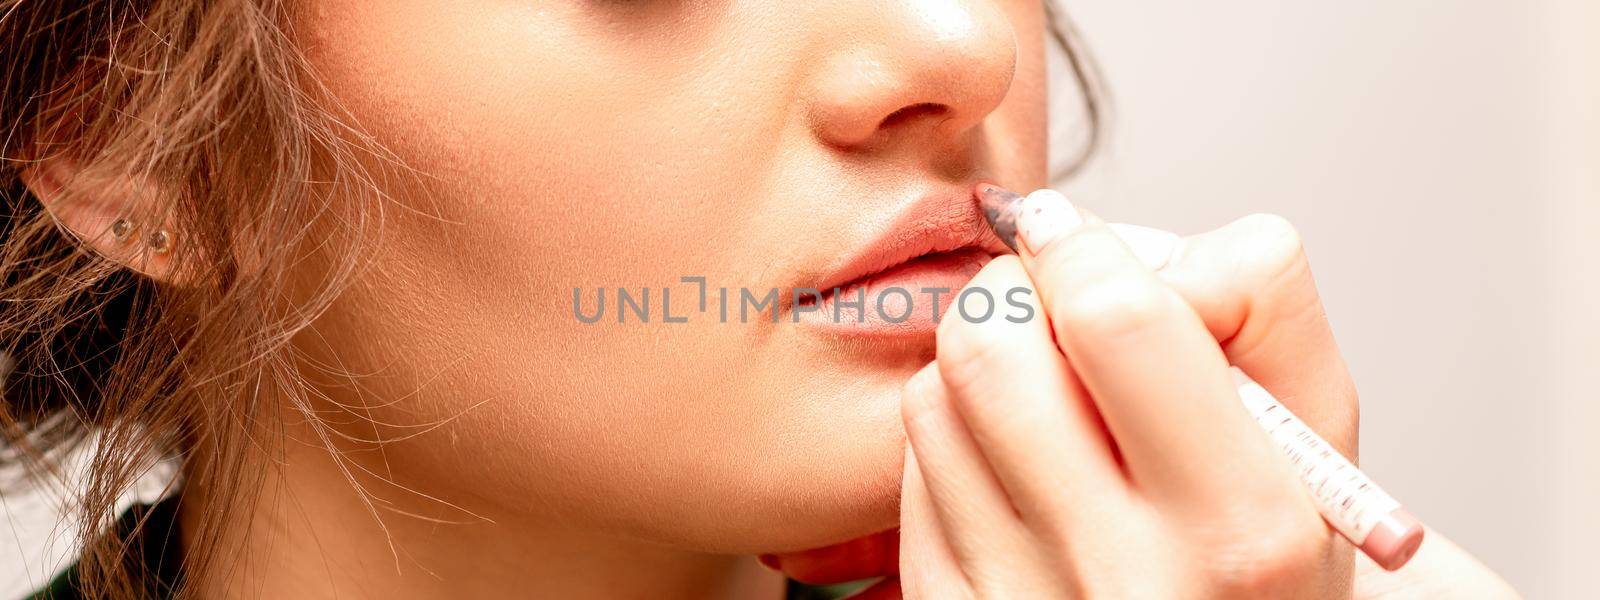 Lips makeup. Makeup artist applies contour with a pencil to the lips of a young woman in a beauty salon. by okskukuruza